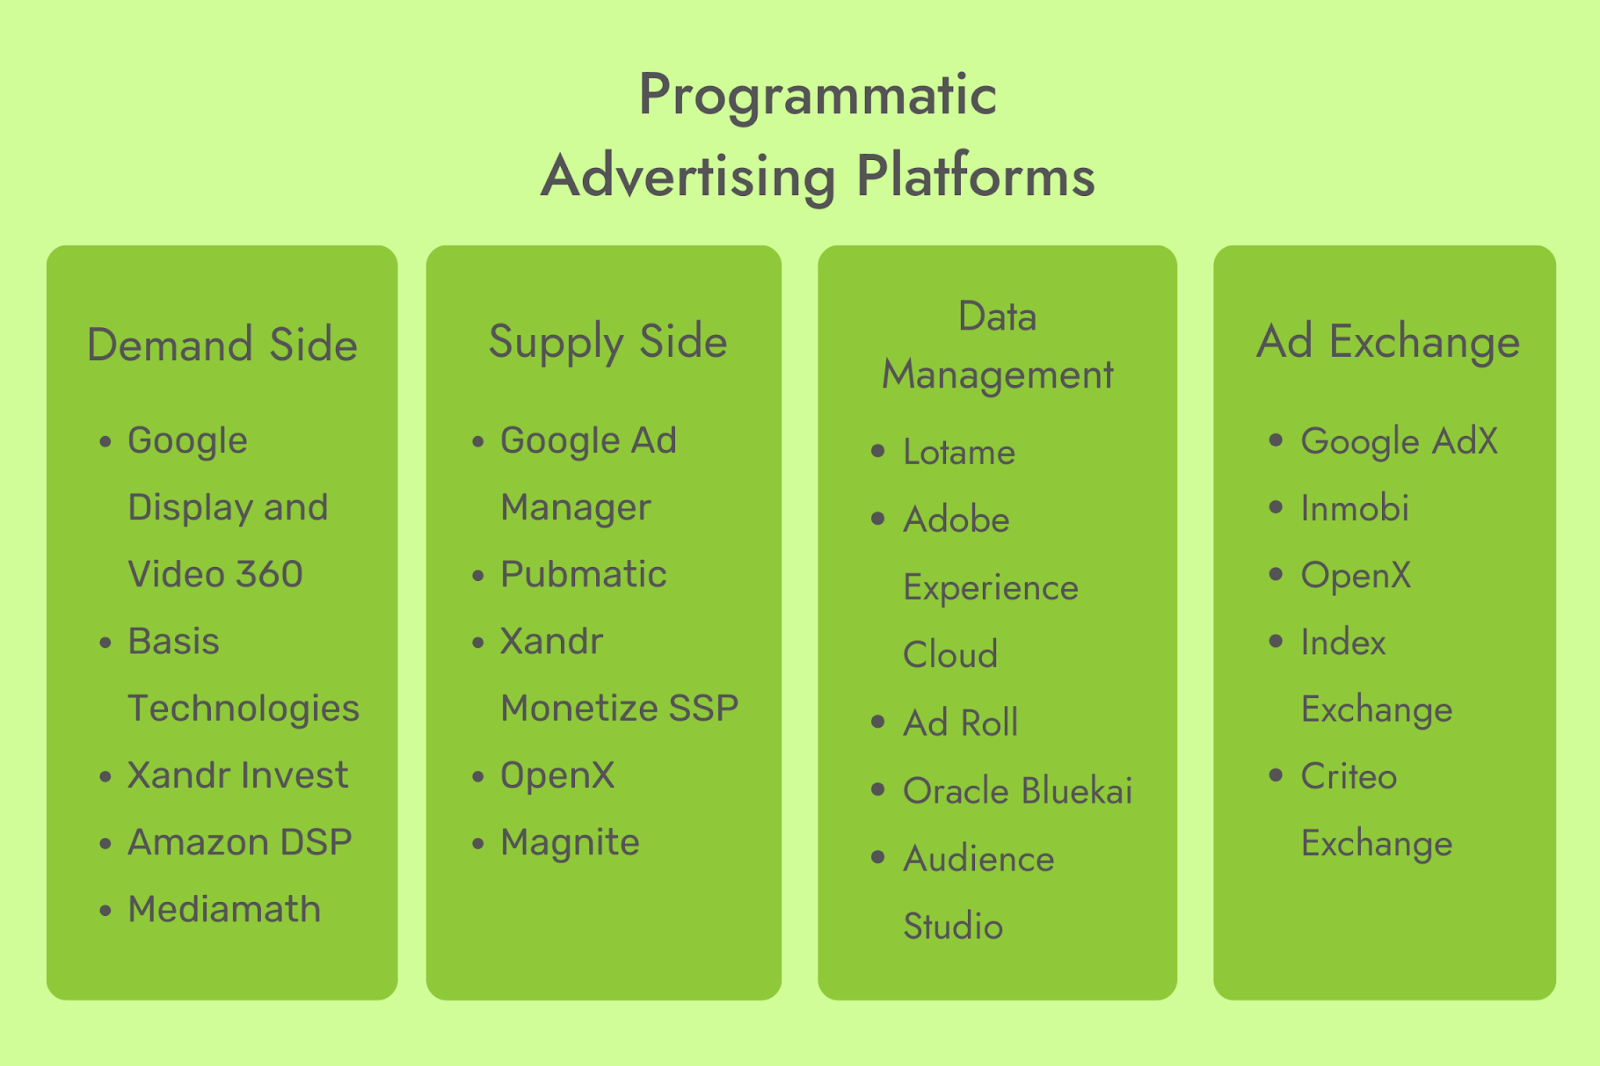 Common platforms used for programmatic advertising